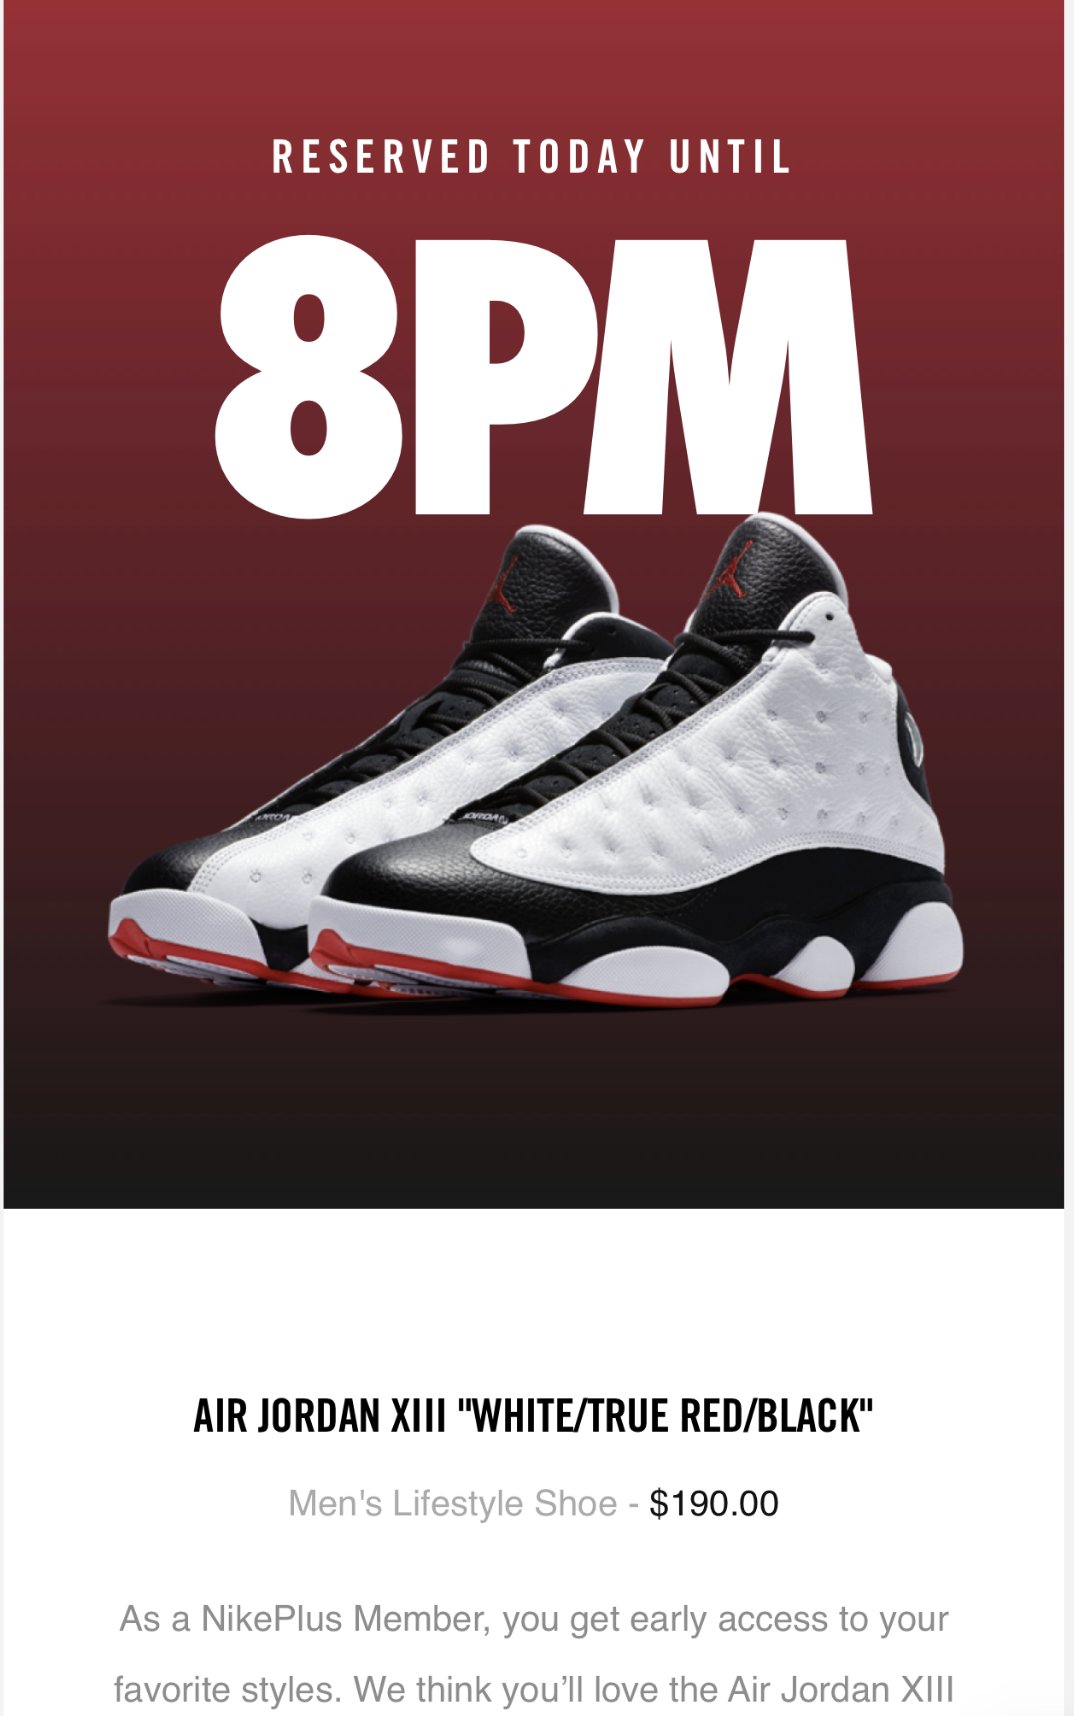 KicksFinder on Twitter: "Check your Nike+ for EARLY ACCESS to purchase the Air Jordan 13 “He Got Game”! https://t.co/fAkIihtcTl" / Twitter